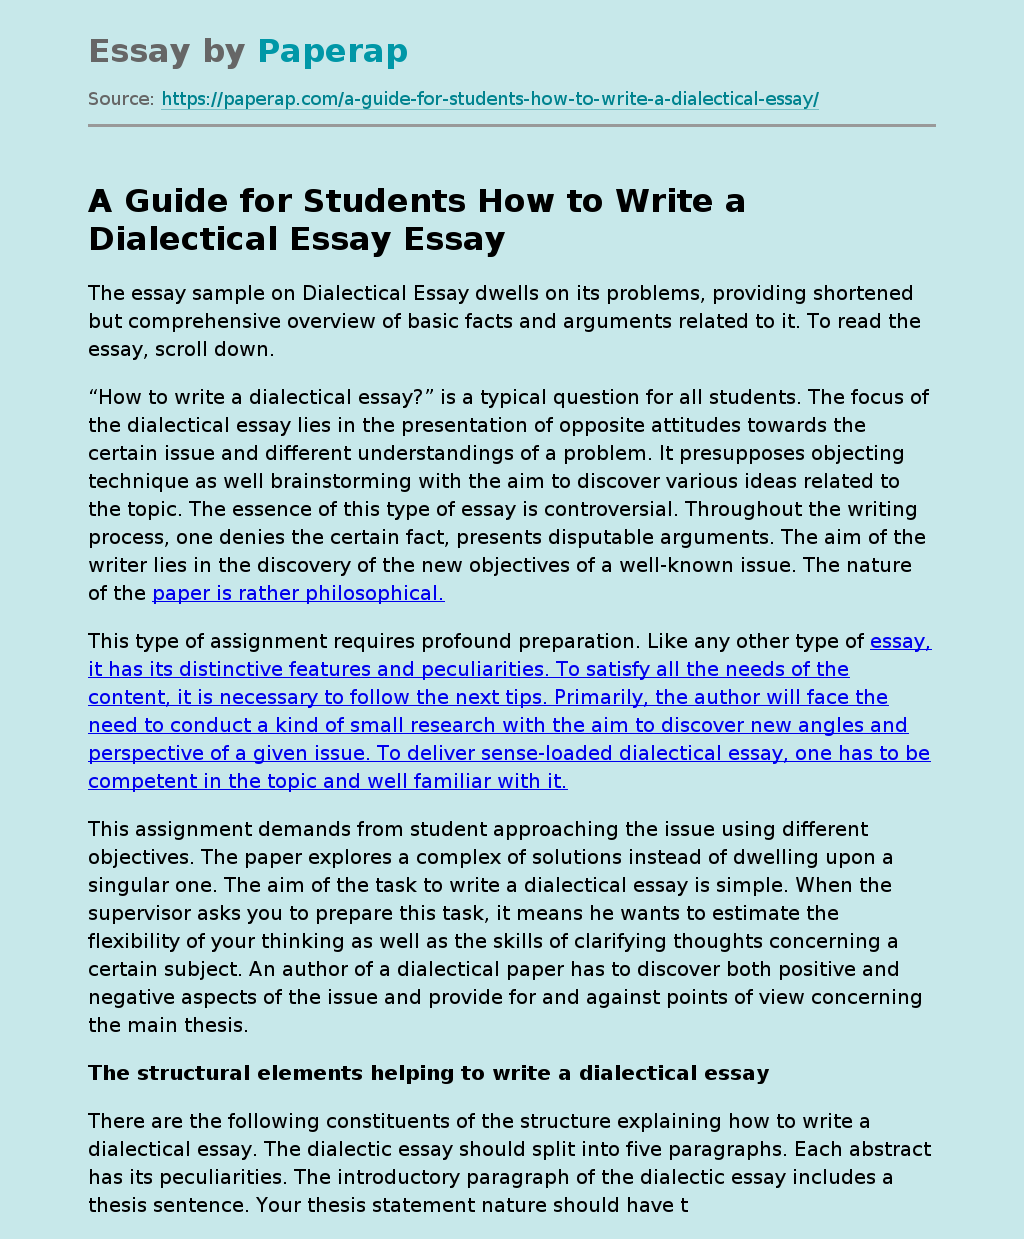 A Guide for Students How to Write a Dialectical Essay